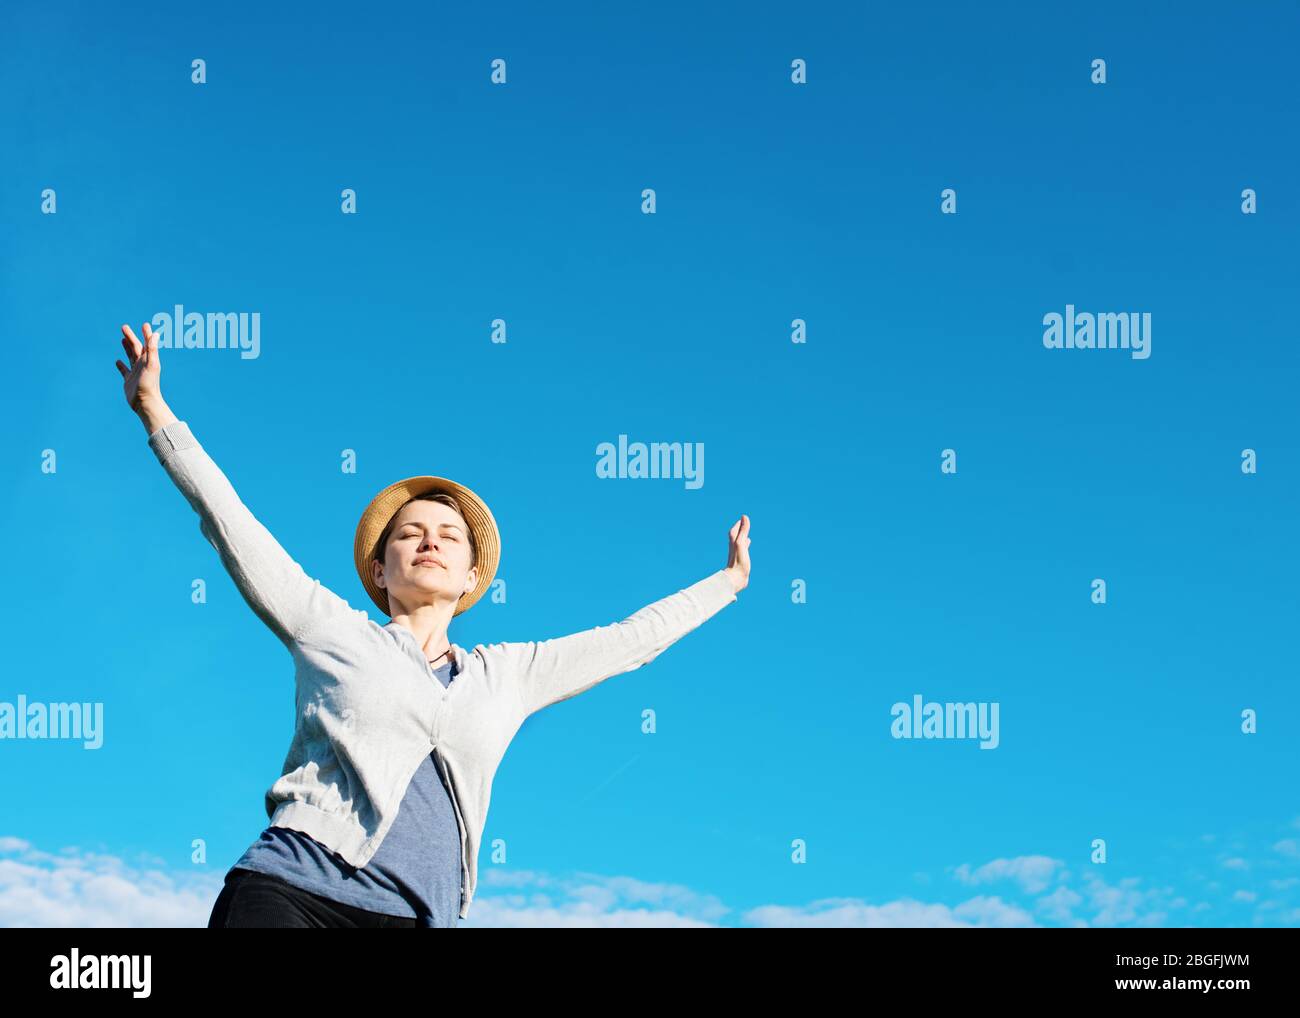 Happy woman wearing grey top, straw hat,  raised her hands high against blu sky Stock Photo